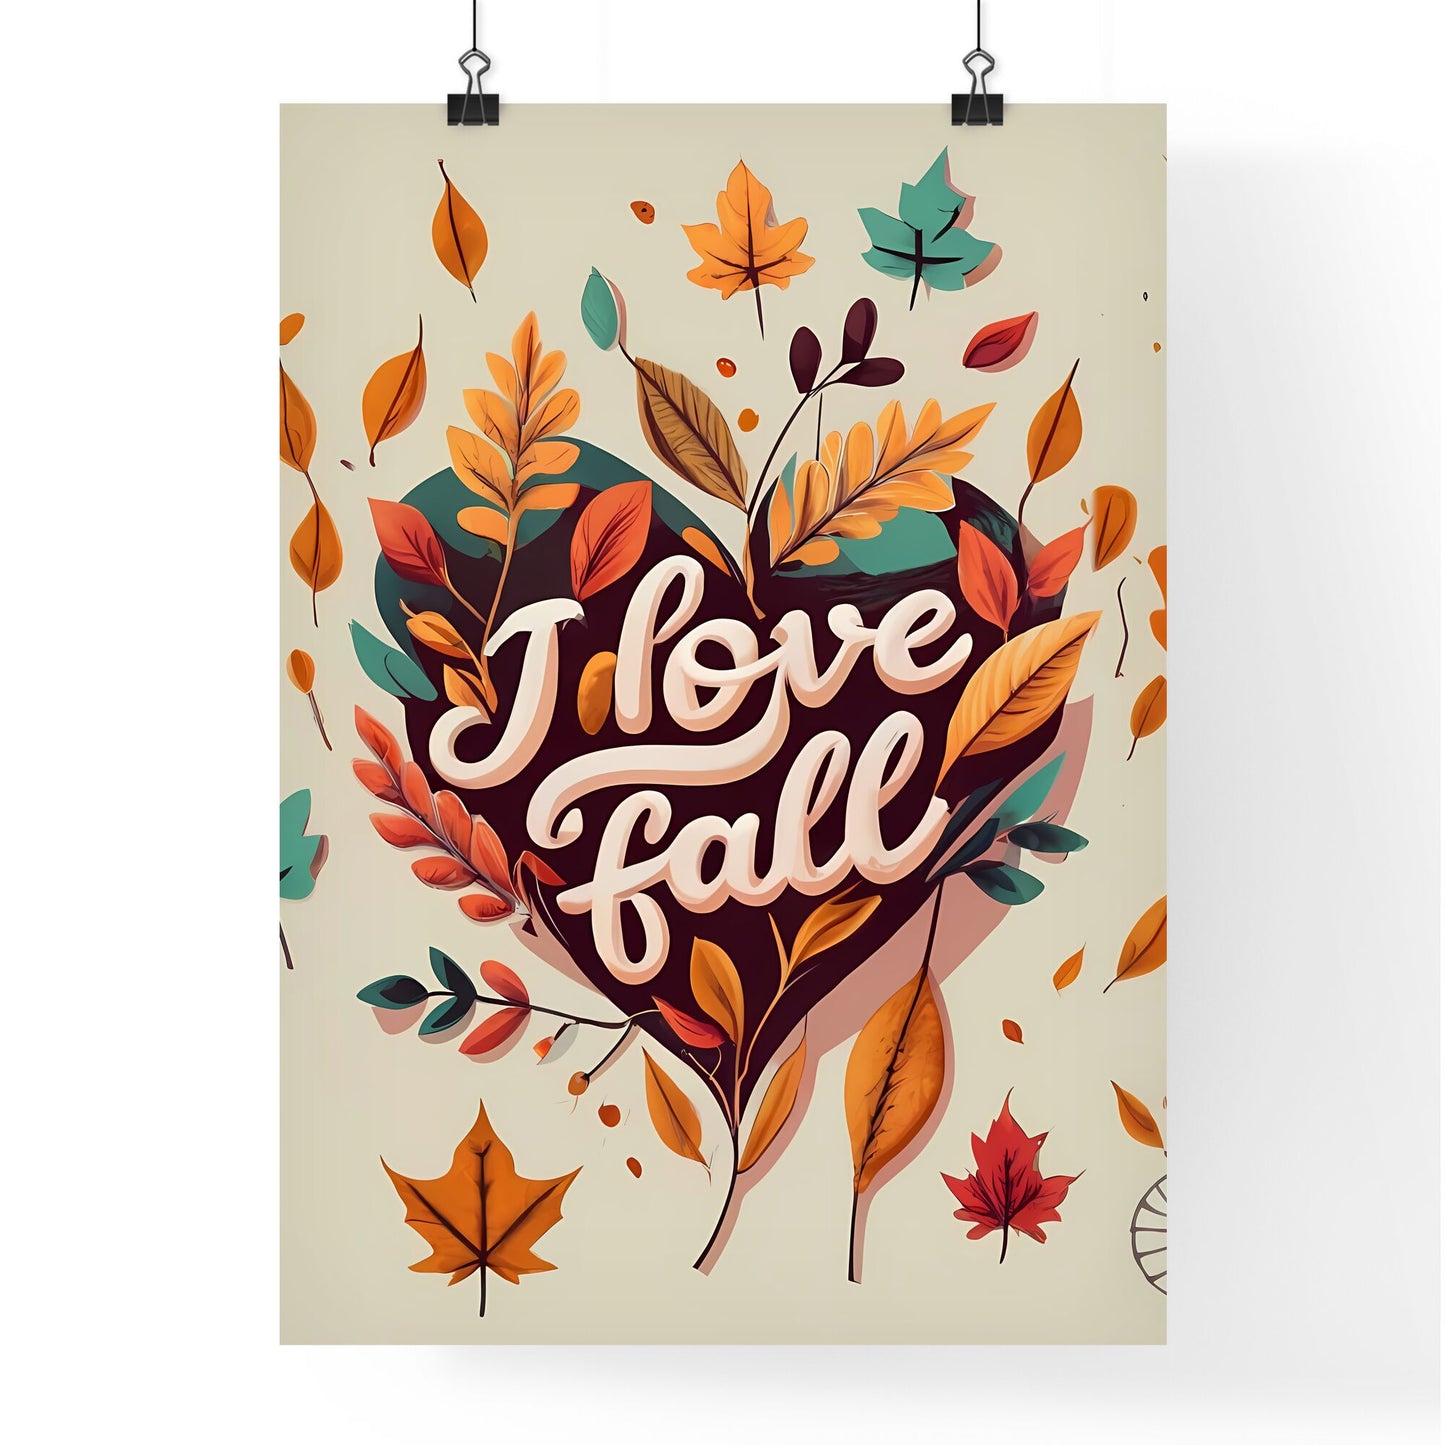 I Love Fall - A Heart Shaped Sign With Leaves And A Clock Art Print Default Title